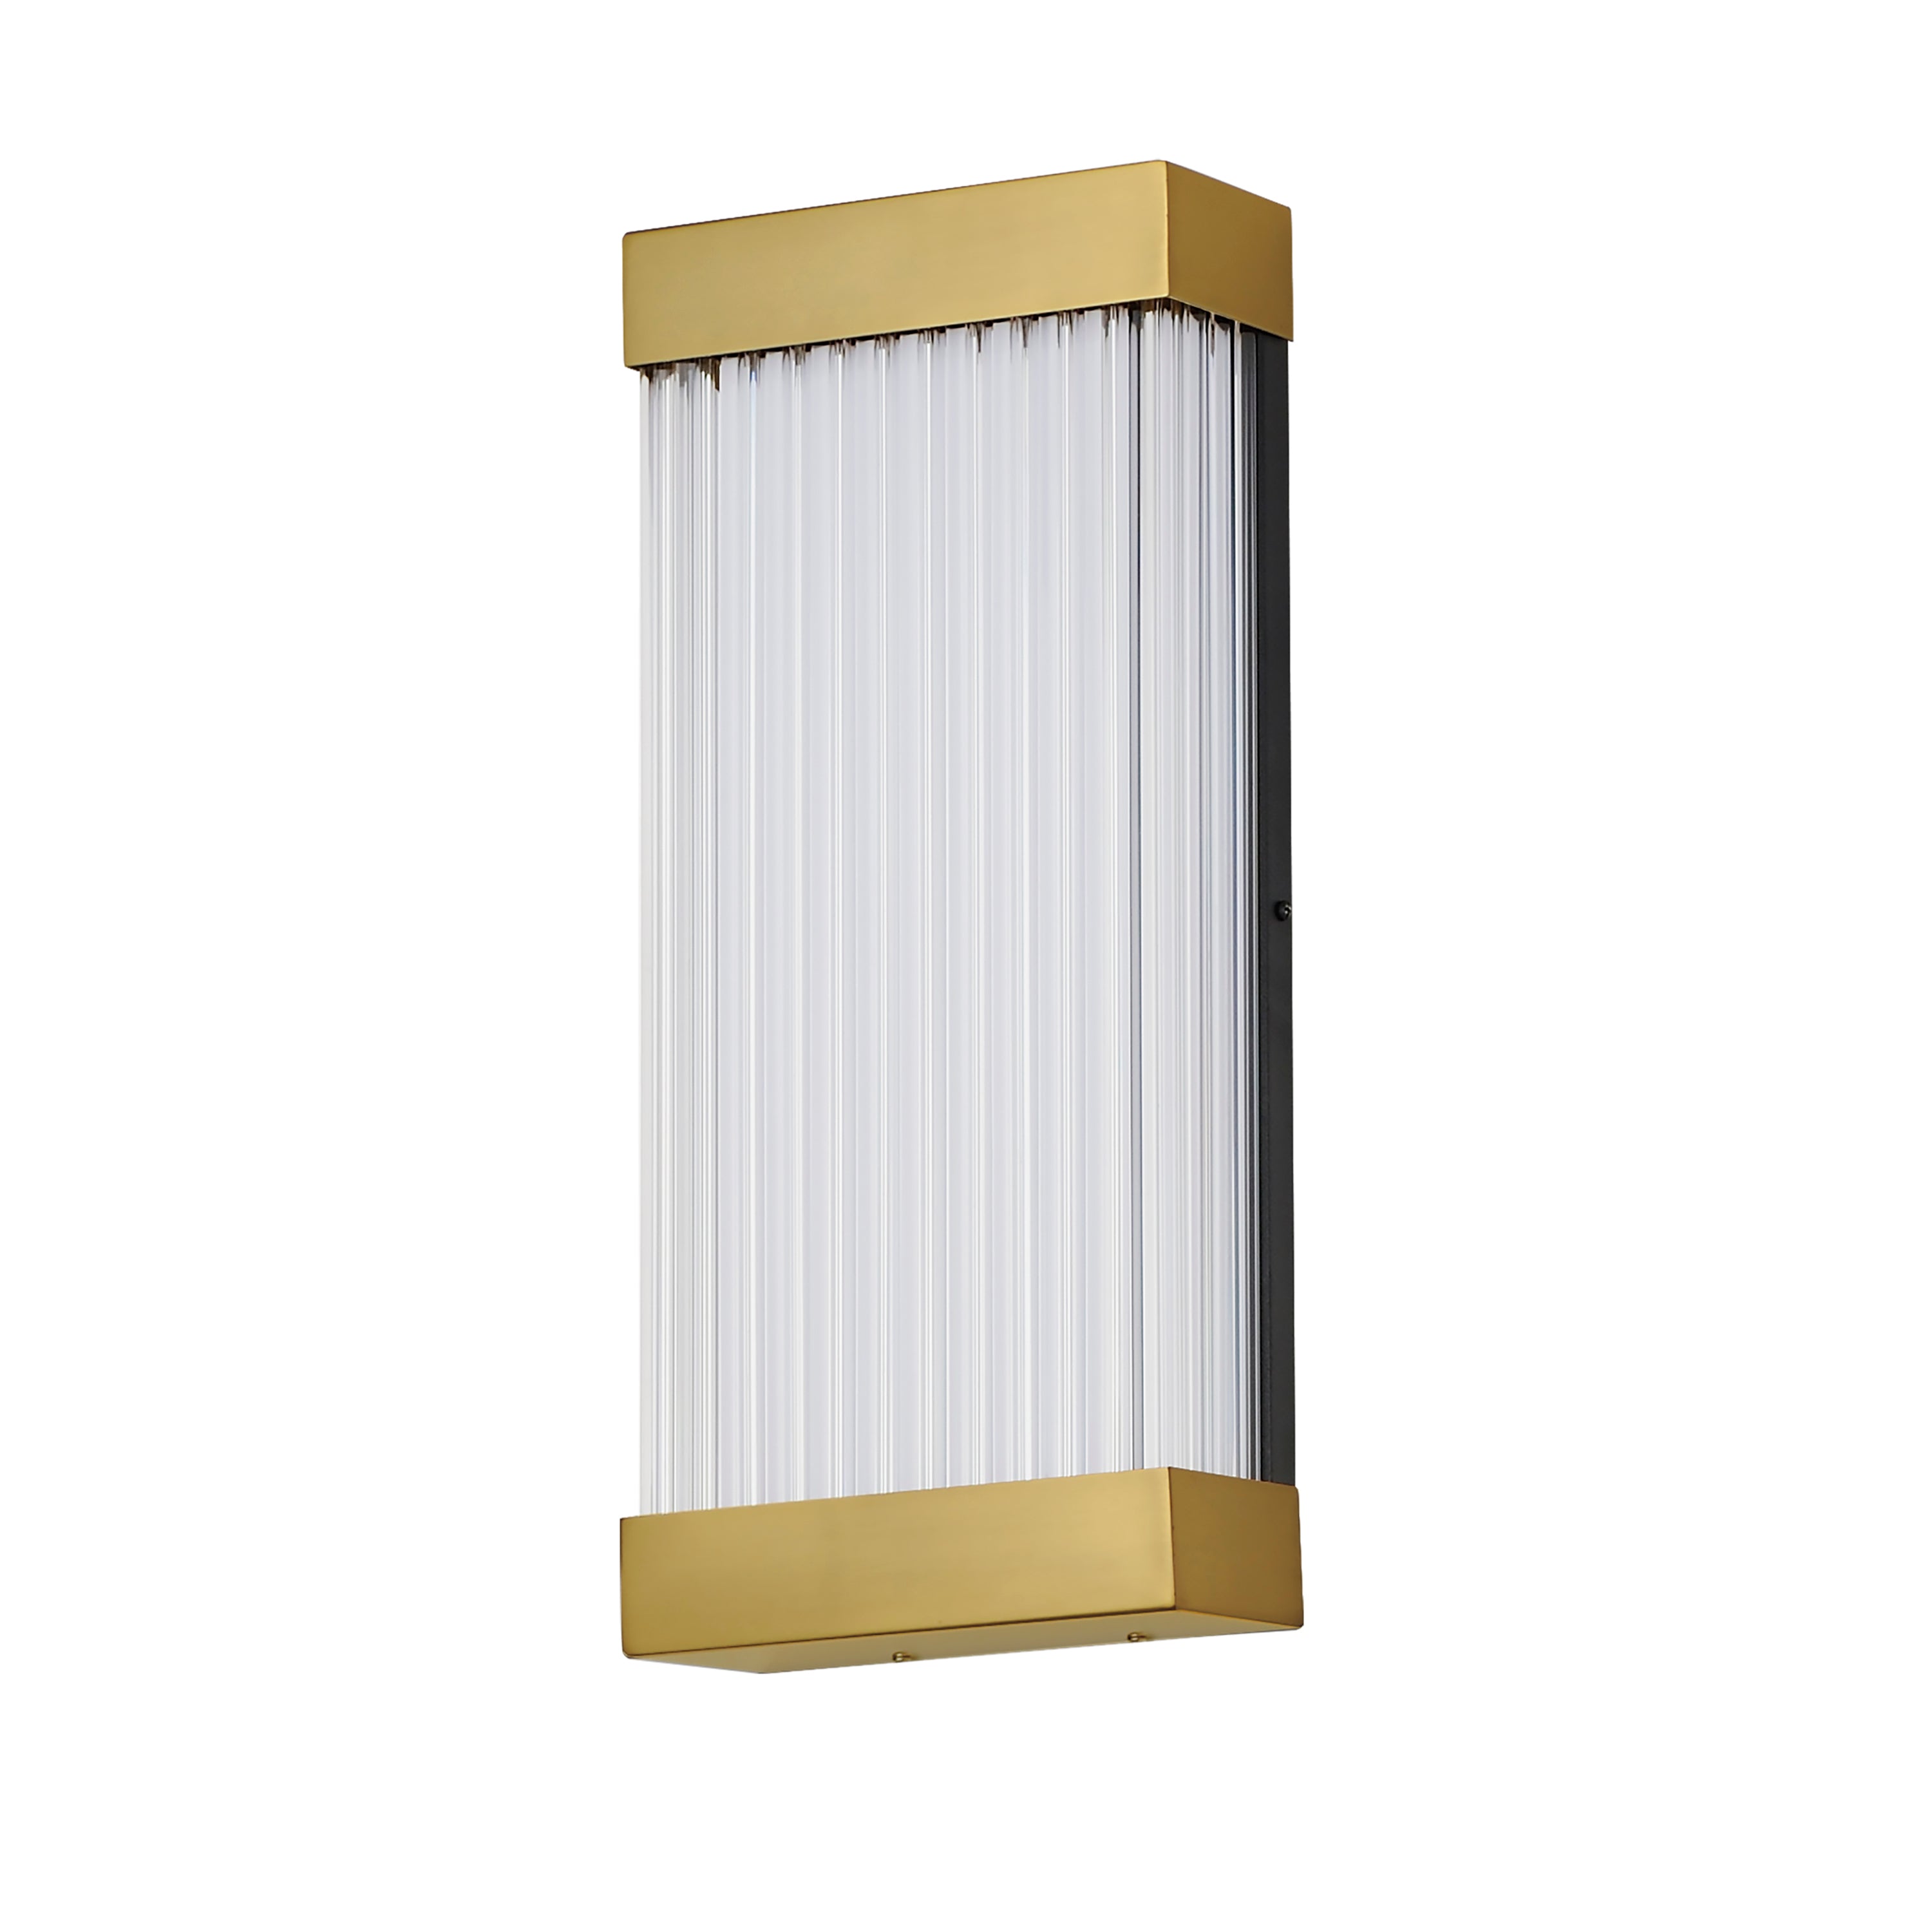 Acropolis-Outdoor Wall Mount Outdoor l Wall ET2 x8x18 Natural Aged Brass 